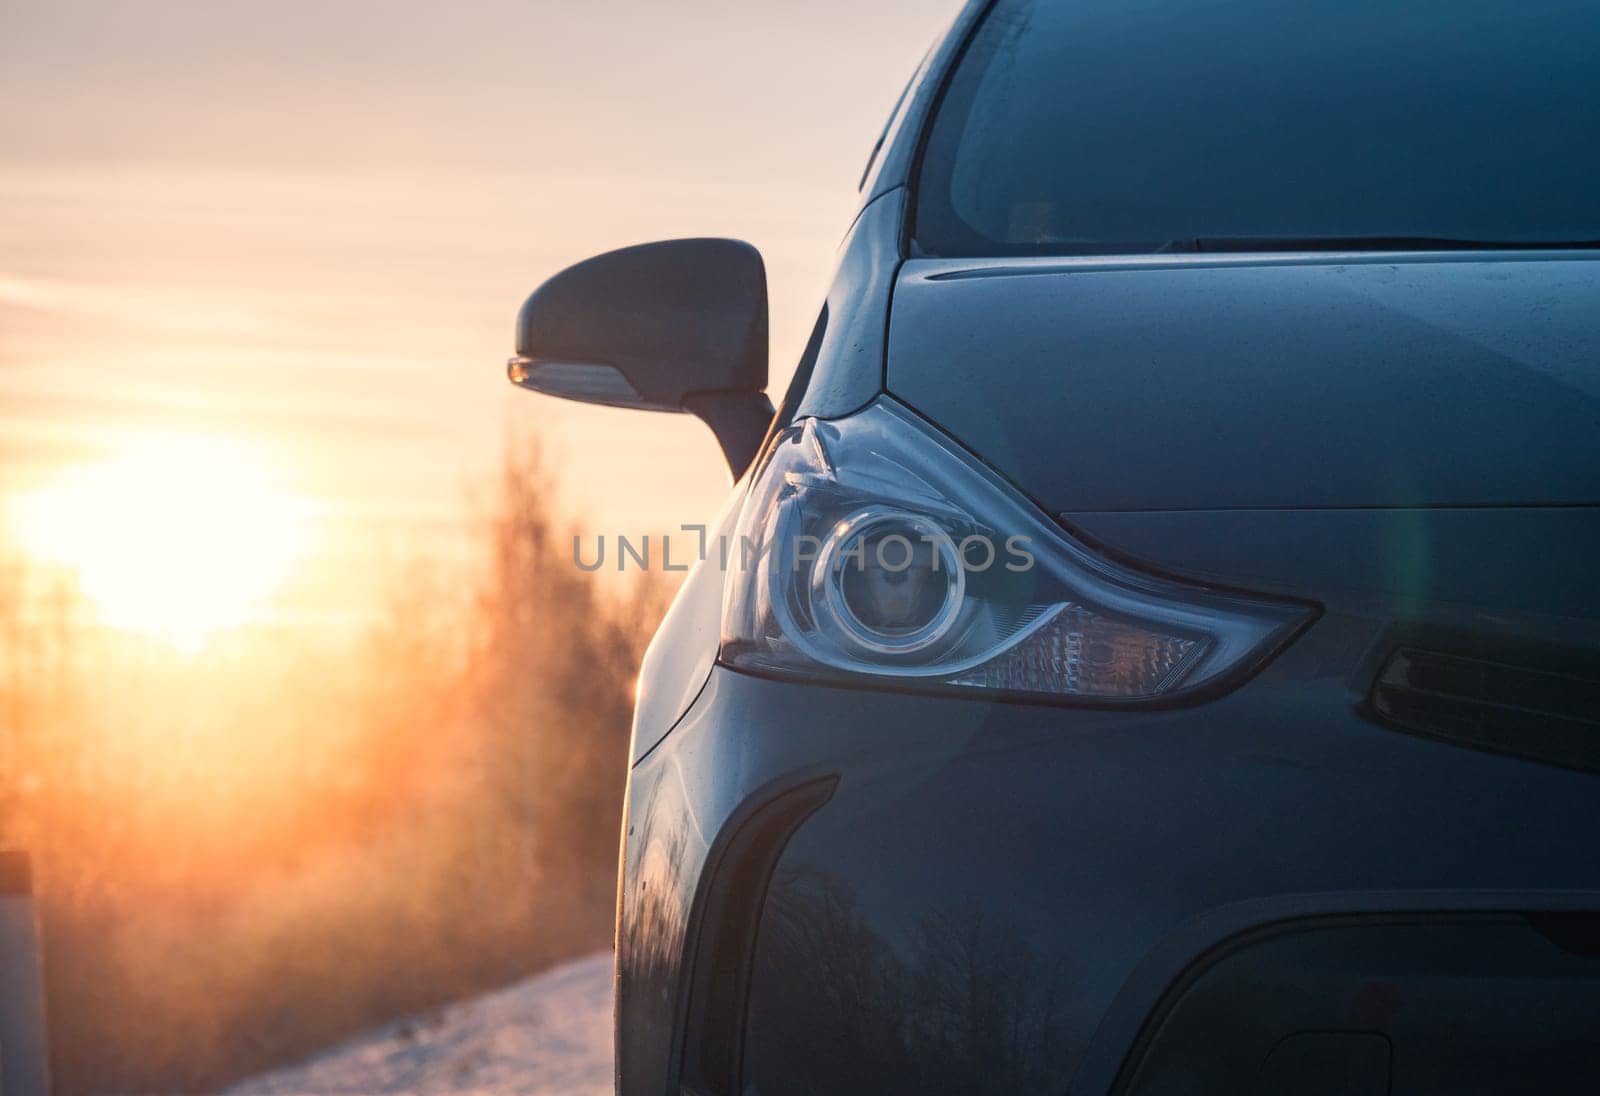 Dark gray car parked on snowy road at sunrise in winter countryside by Busker